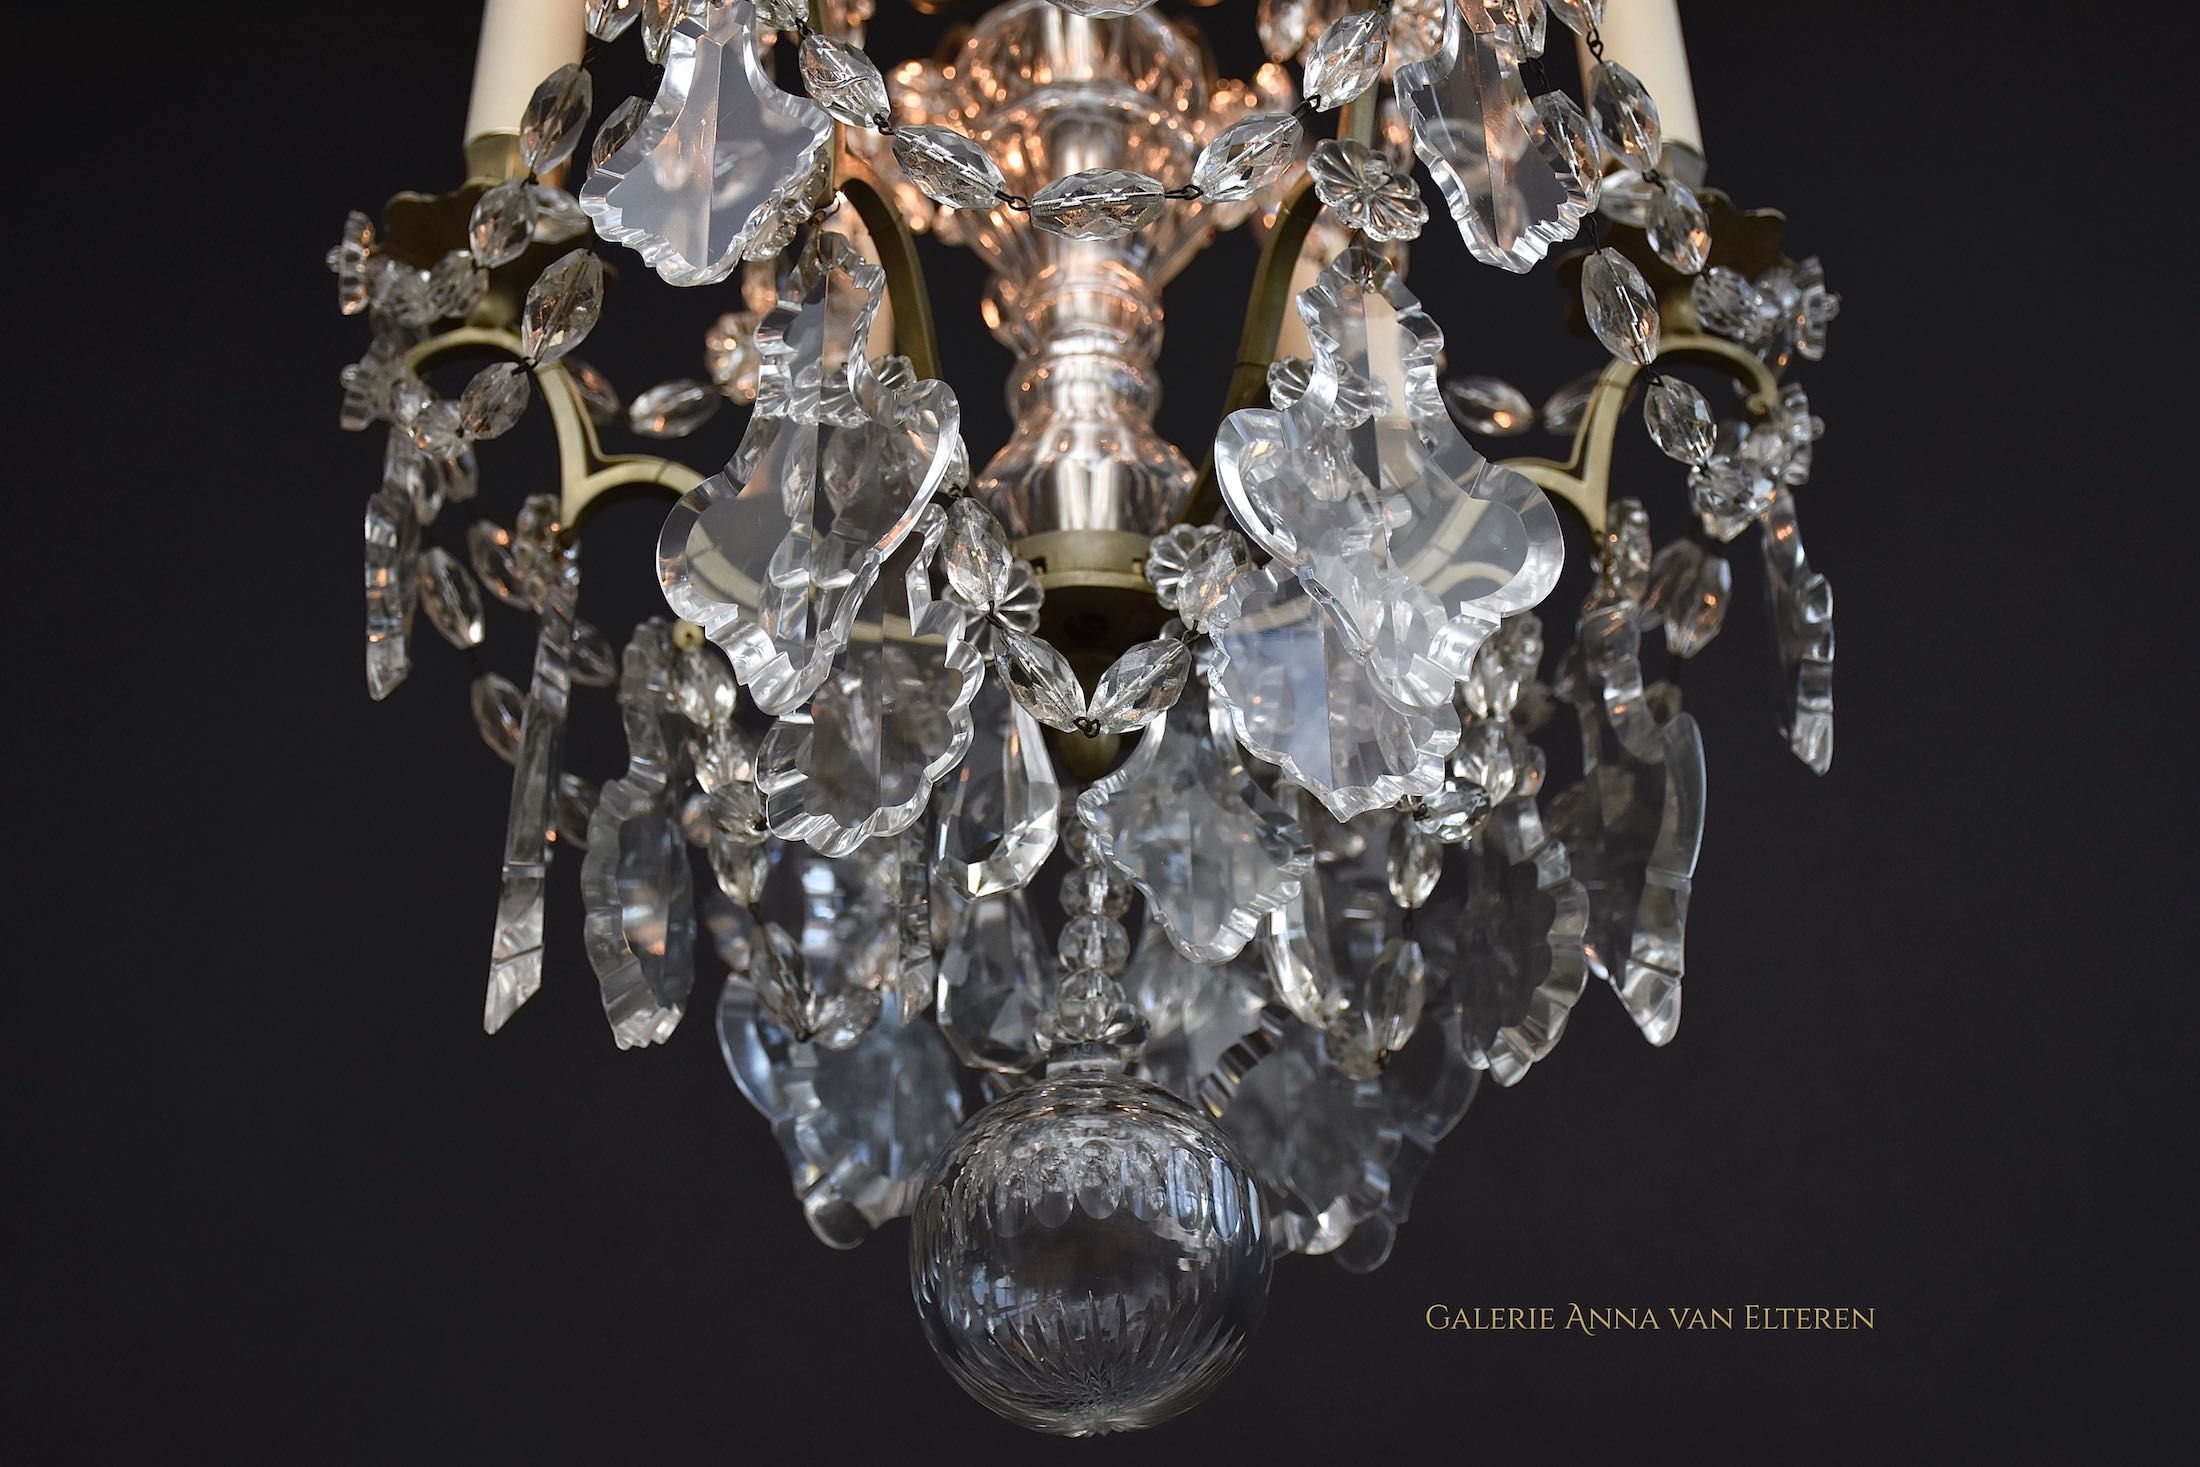 Antique French chandelier in the style of Louis XVI